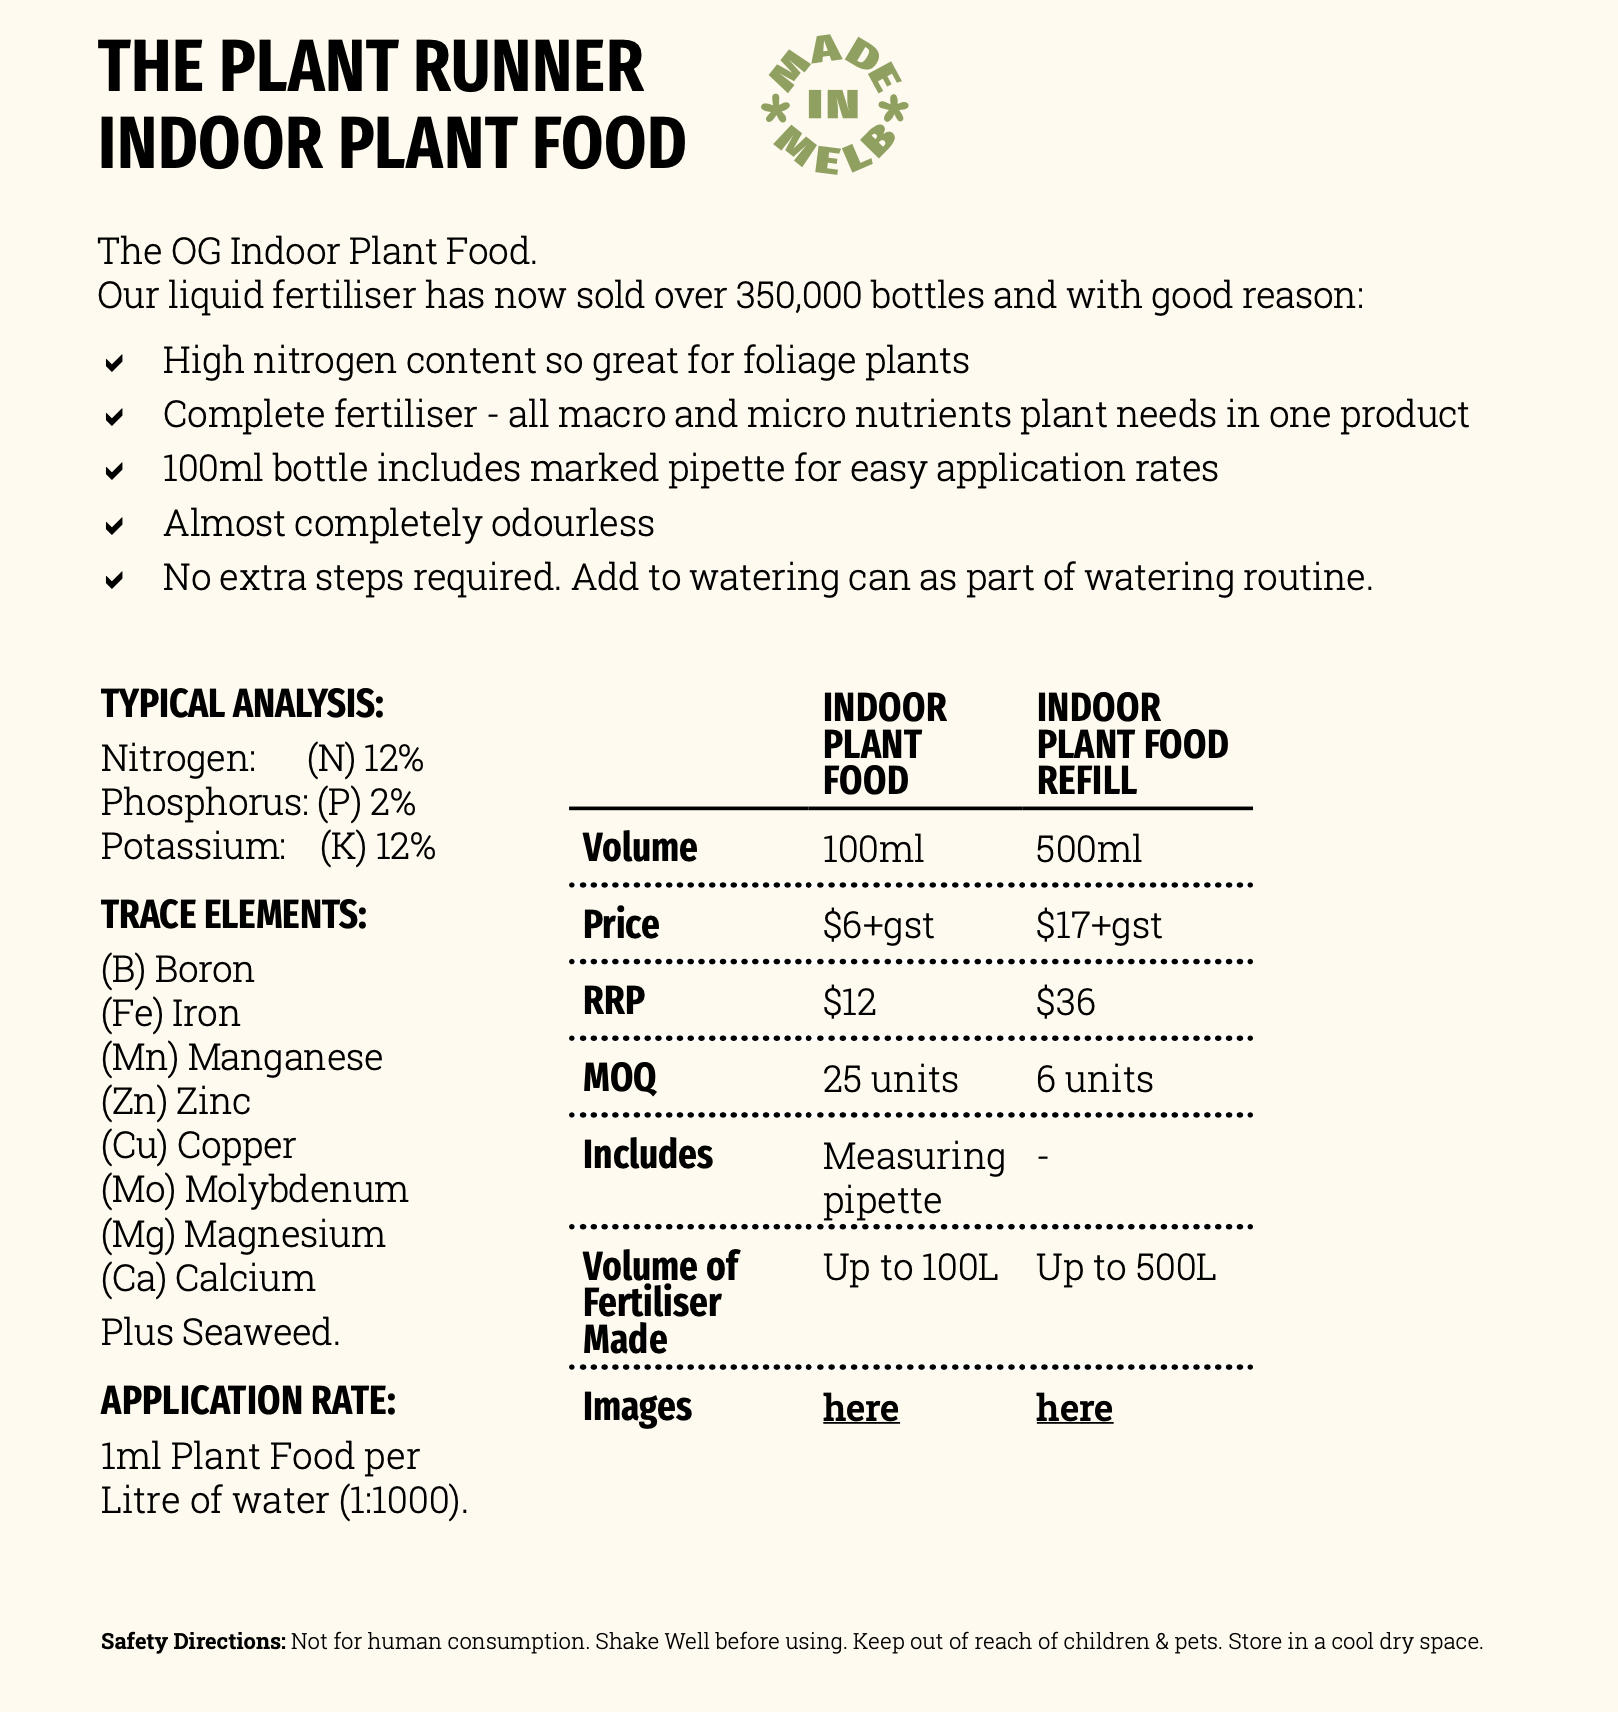 The Plant Runner Indoor Plant Food